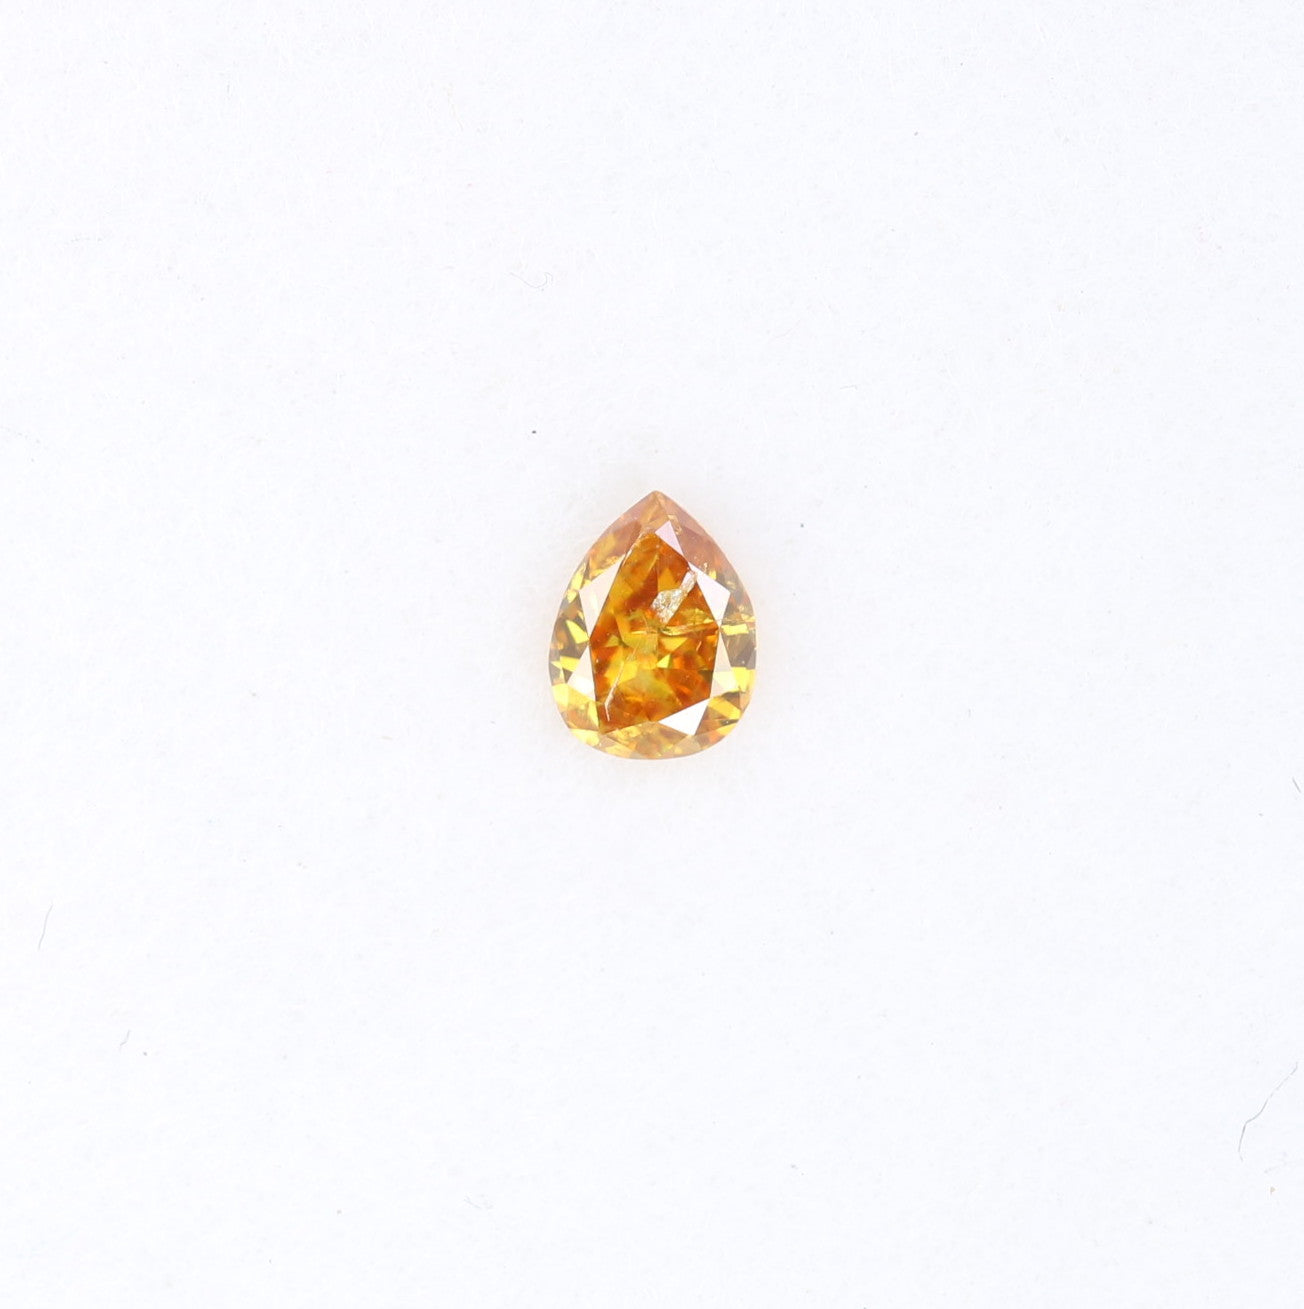 0.08 CT 3.30 MM Pear Shape Fancy Brown Loose Diamond For Engagement Ring